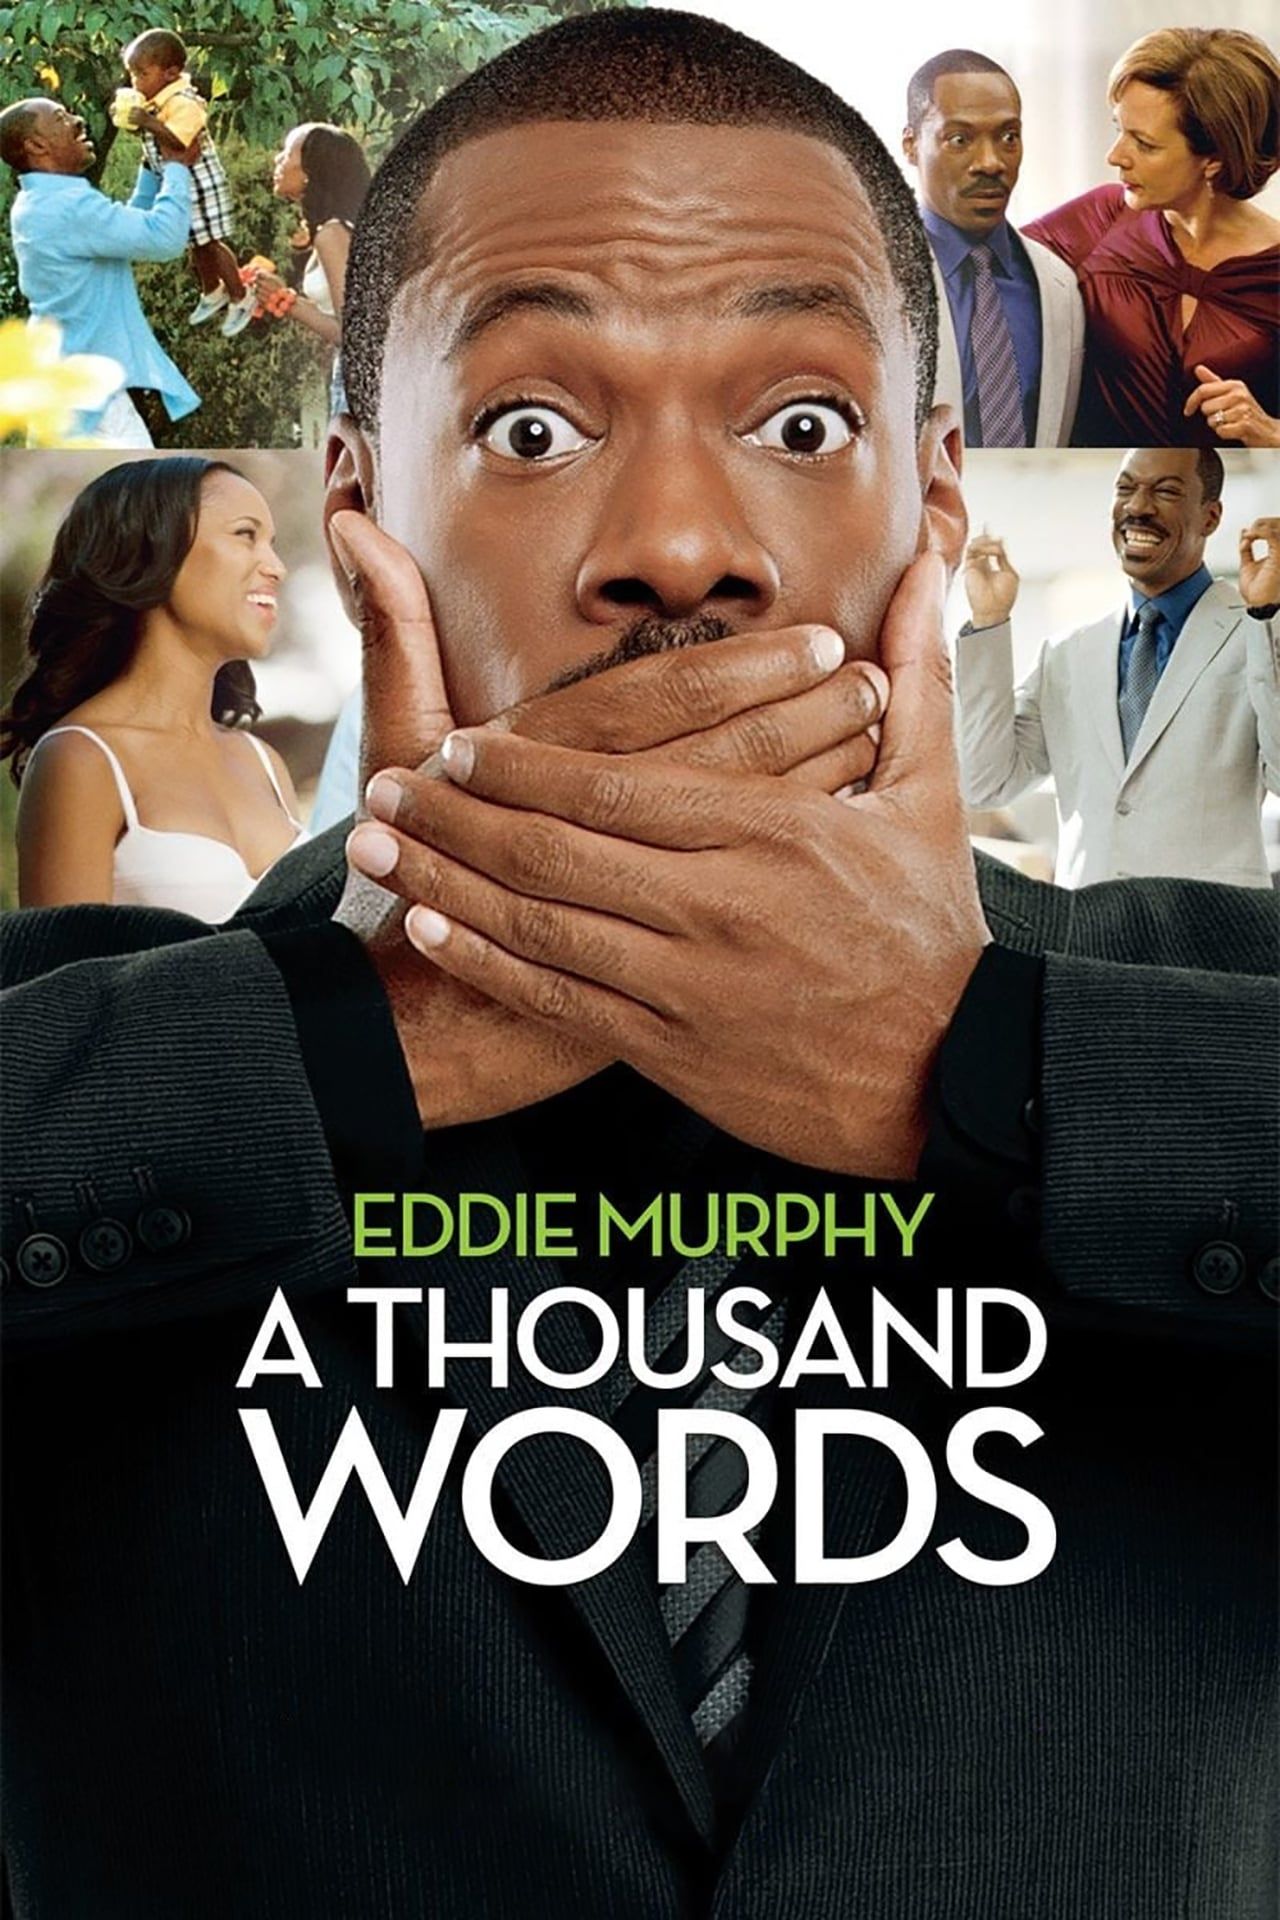 A Thousand Words Movie Poster Showing Eddie Murphy Covering his Mouth